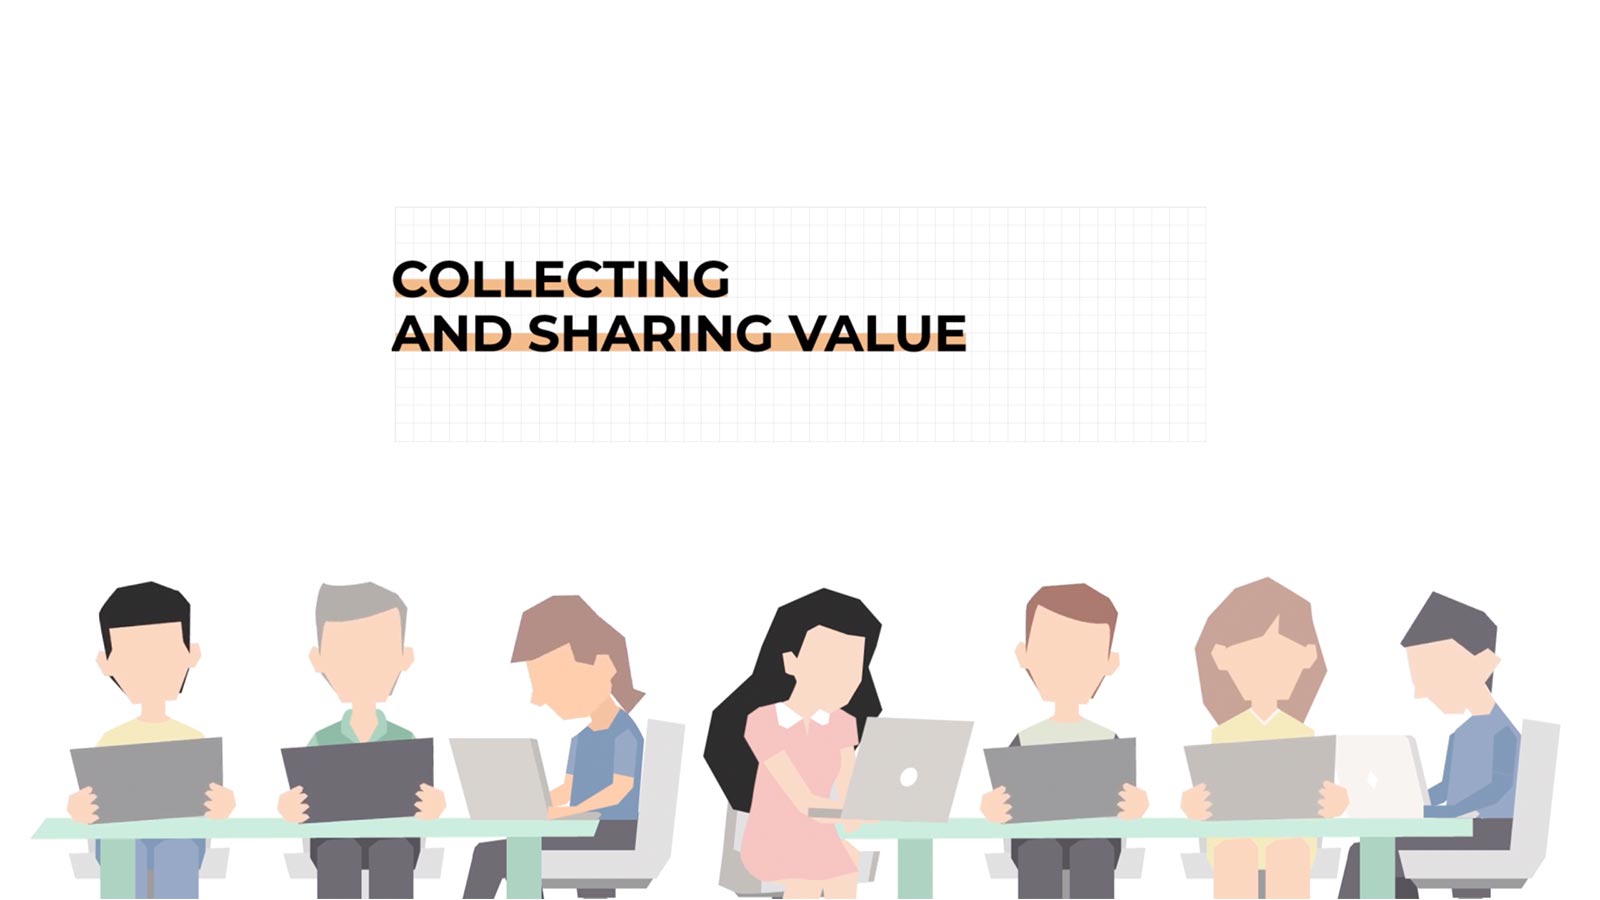 Collecting and sharing value